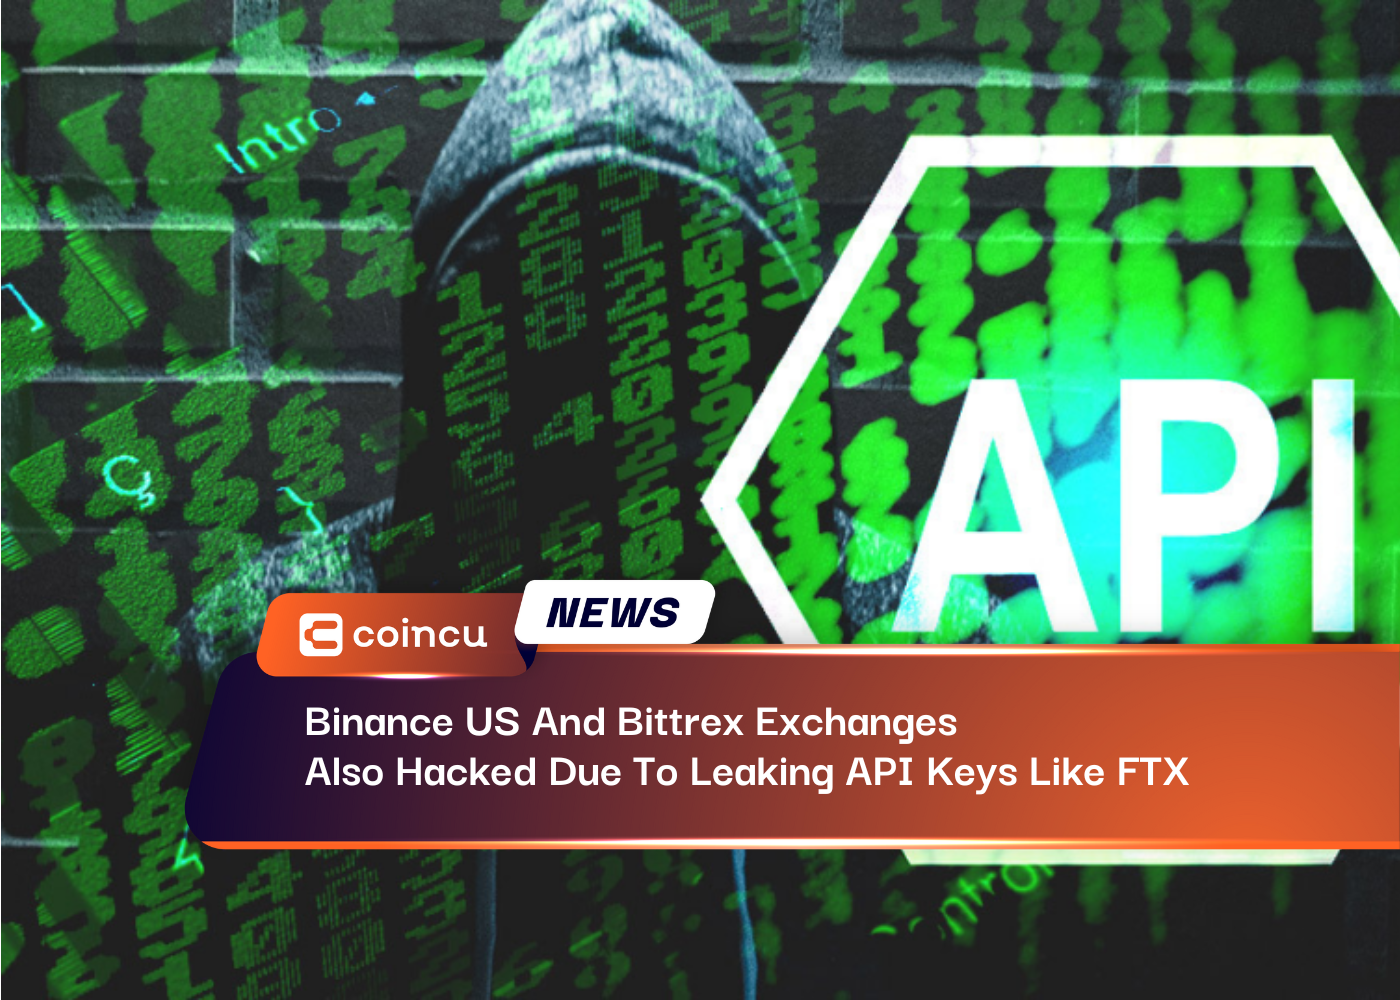 Binance US And Bittrex Exchanges Also Hacked Due To Leaking API Keys Like FTX